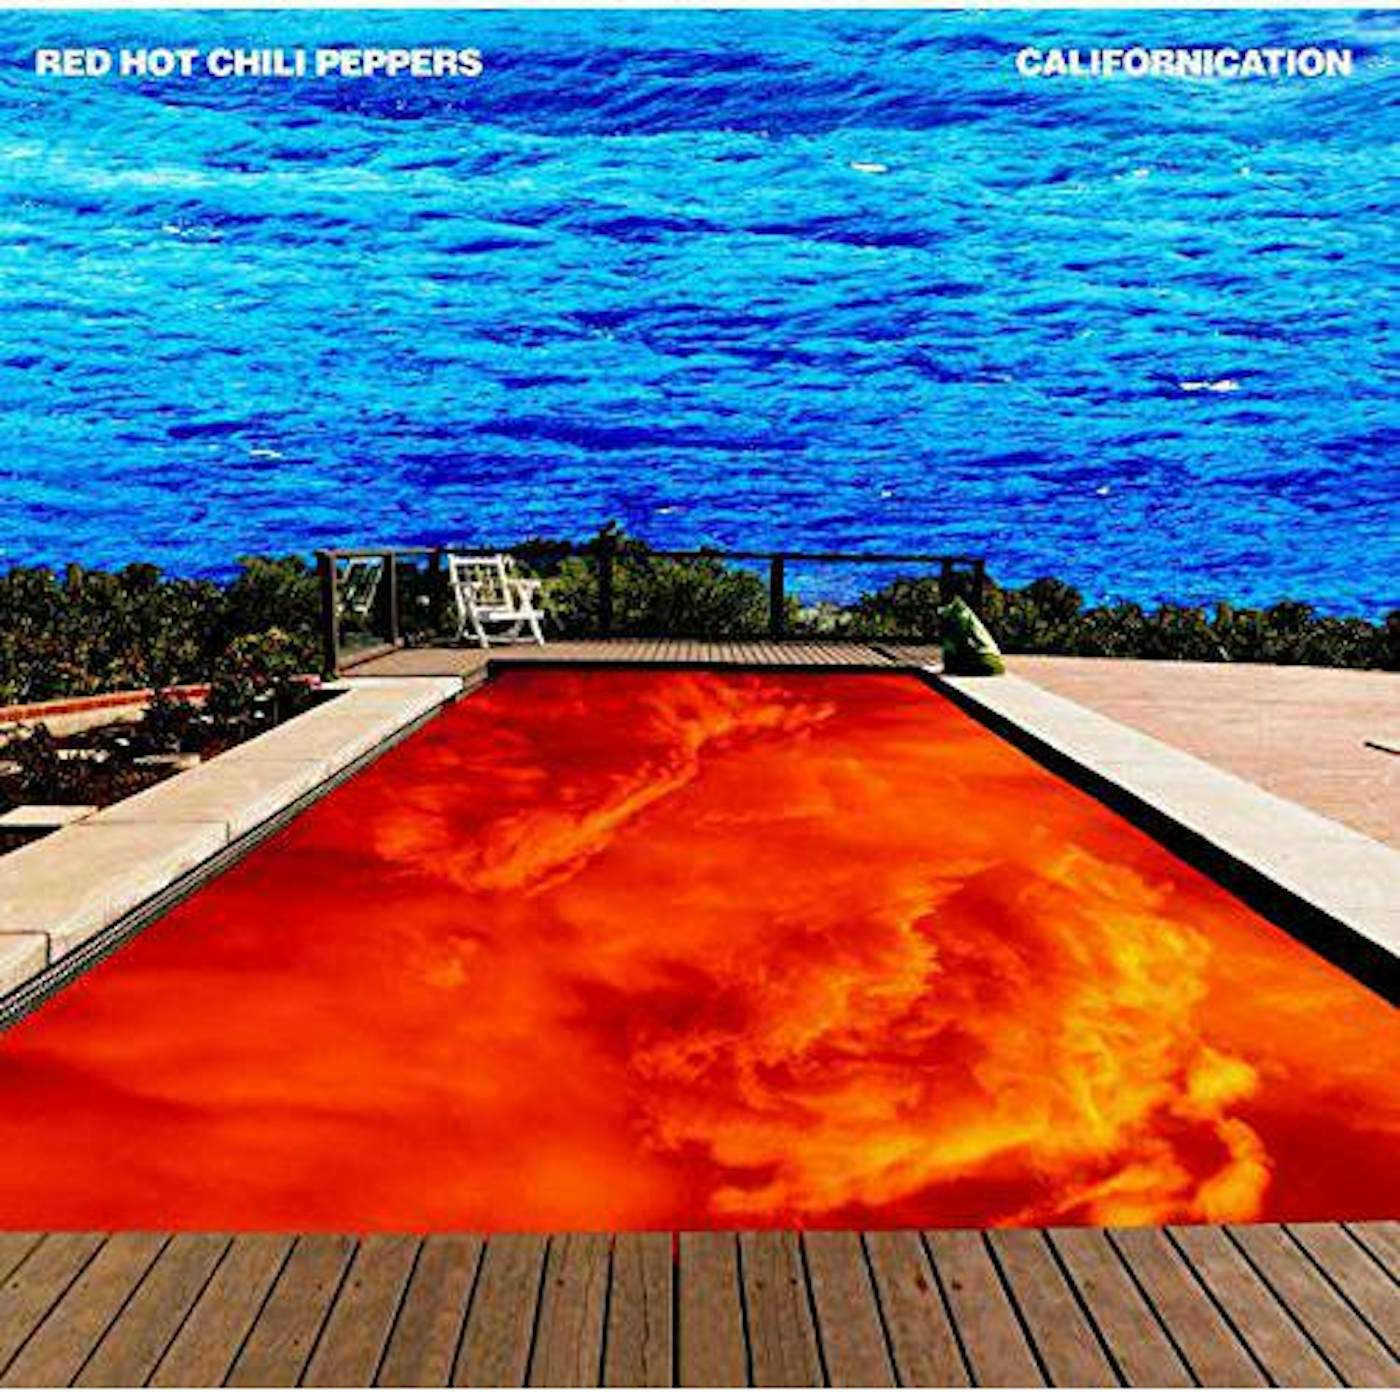 Red Hot Chili Peppers Californication Vinyl Record